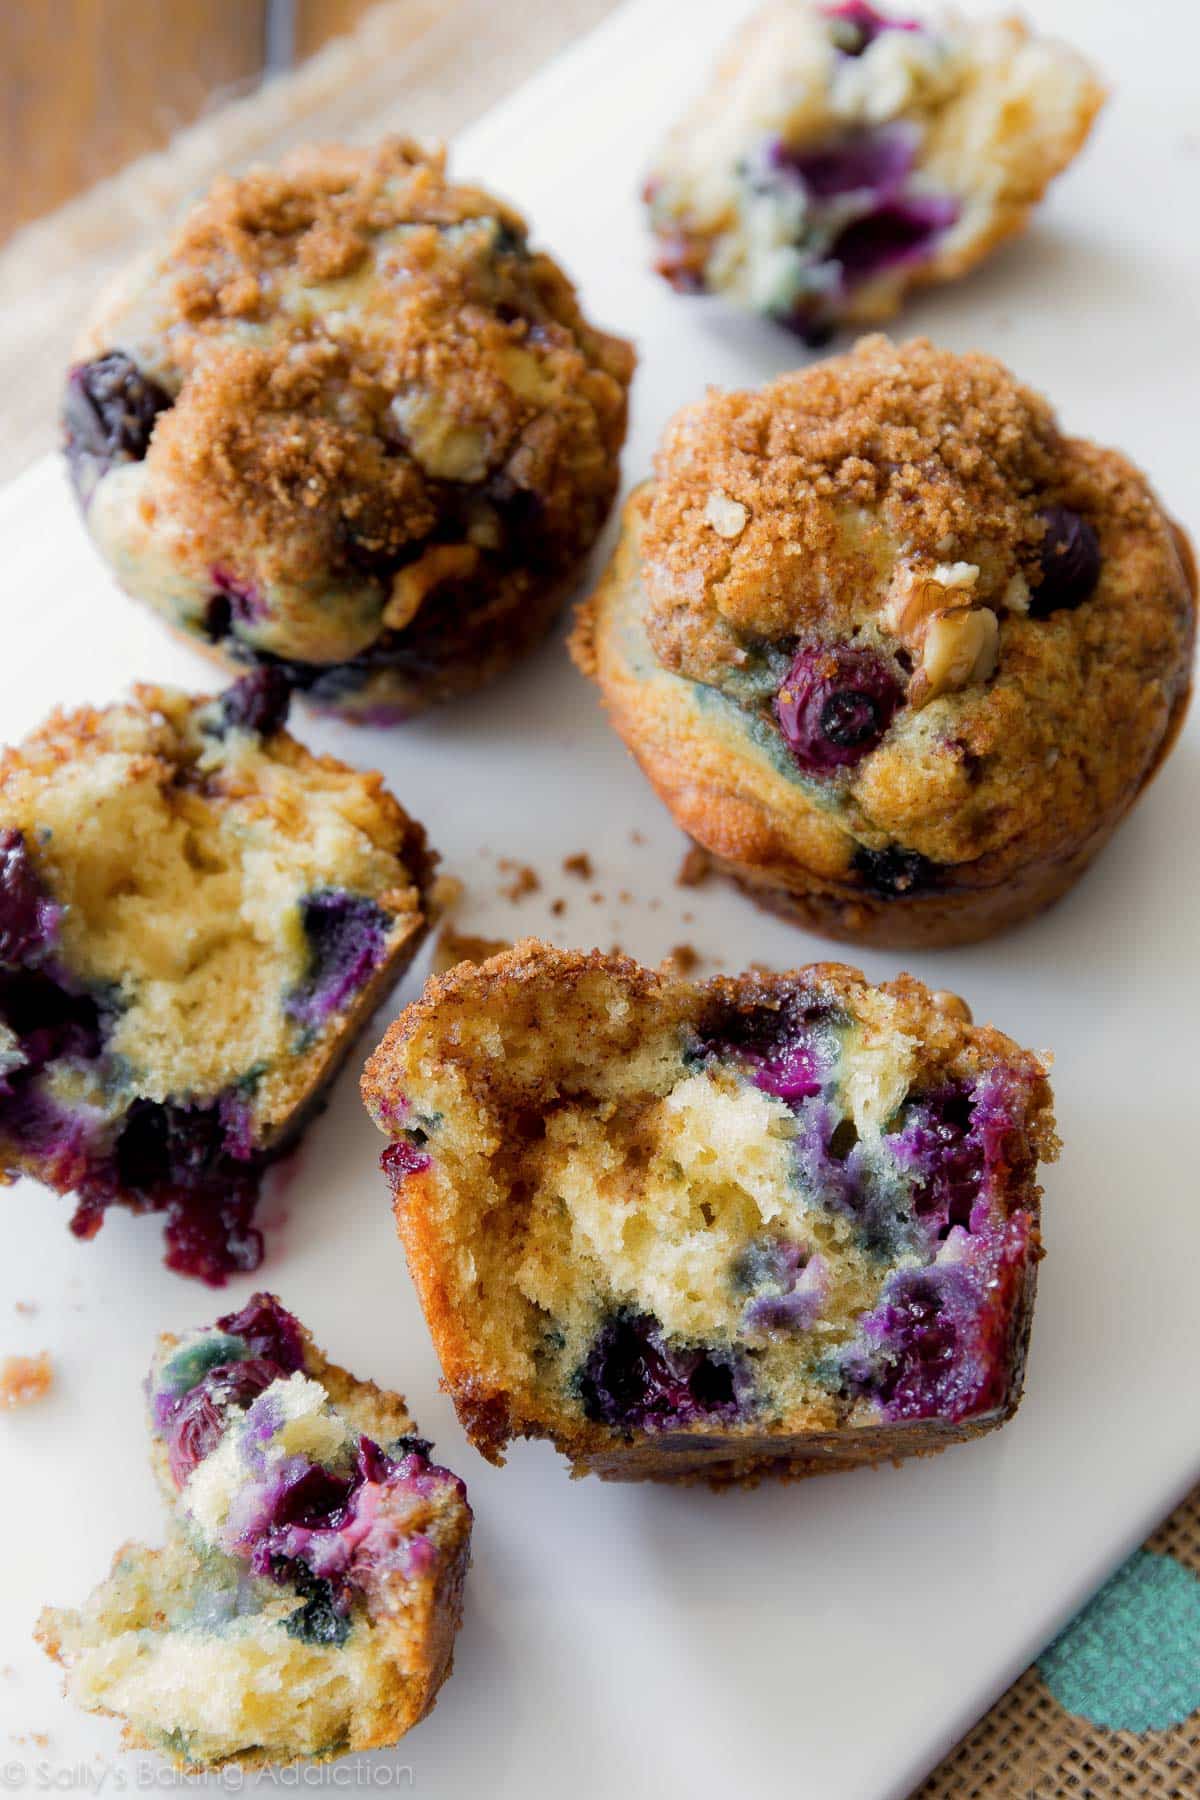 Blueberry muffins and inside of blueberry muffins